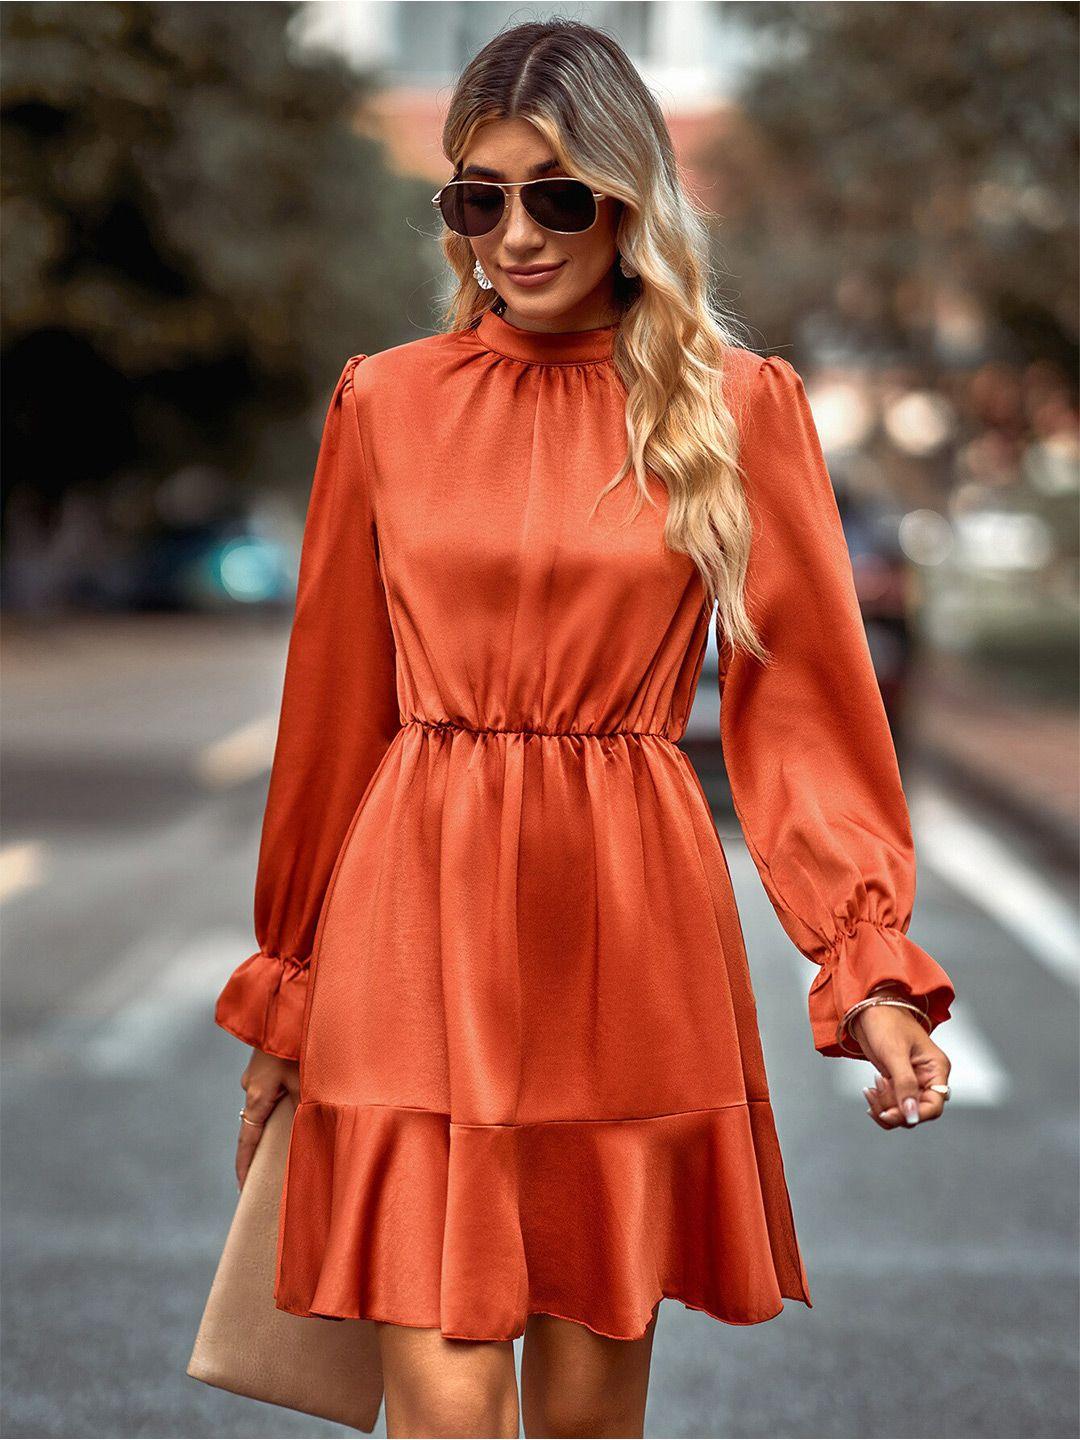 stylecast orange fit and flare dress